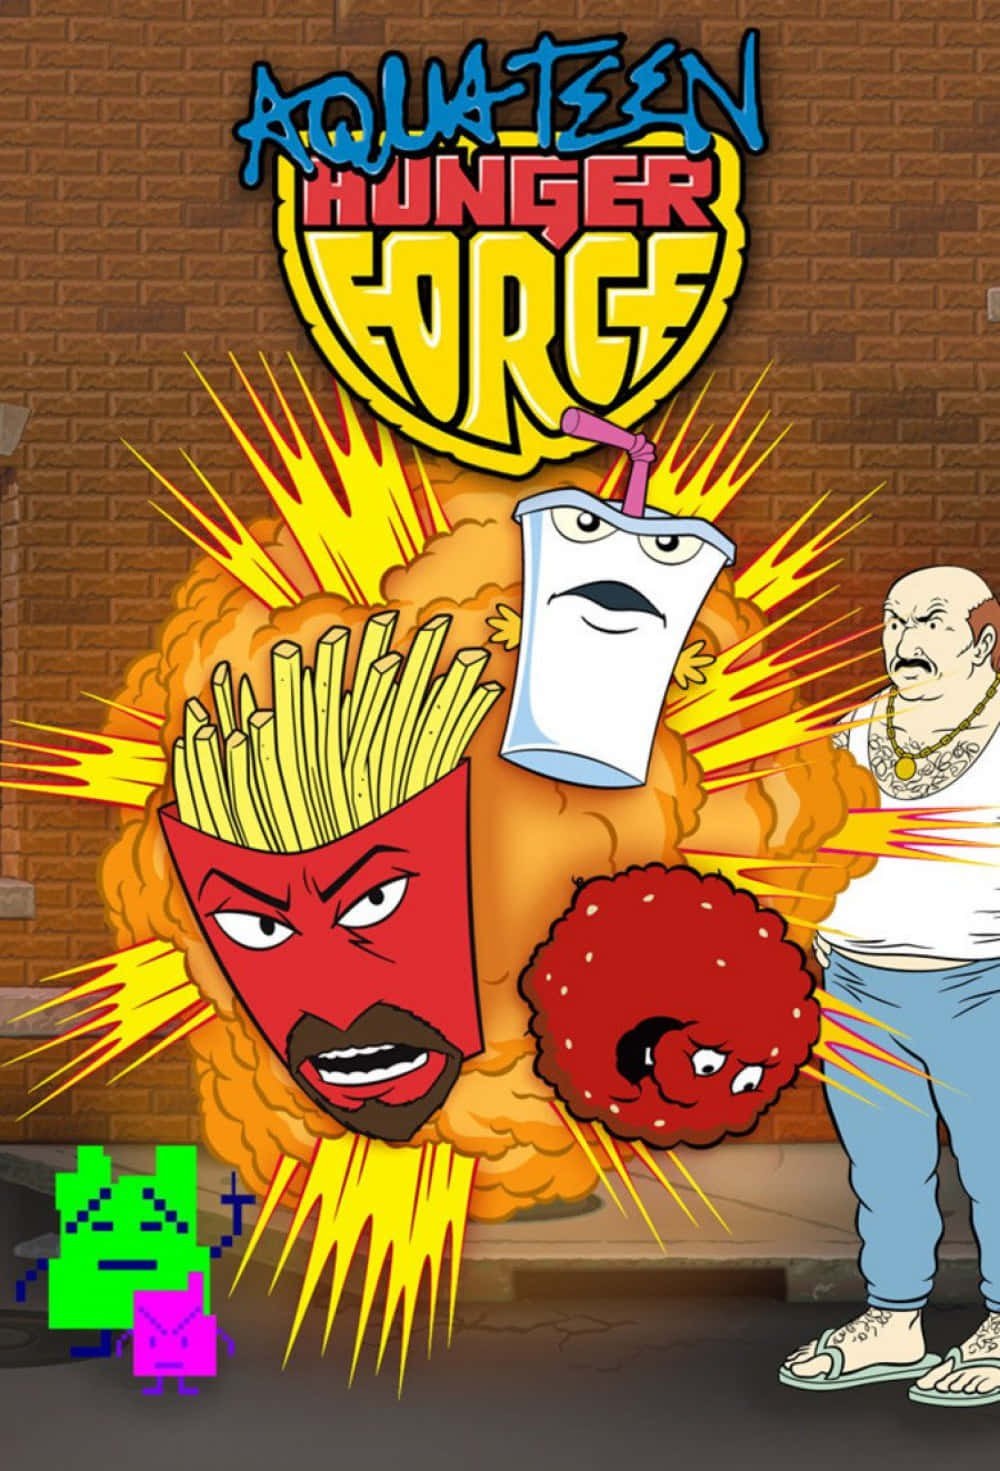 Meet Aqua Teen Hunger Force - The Outrageously Hilarious Trio